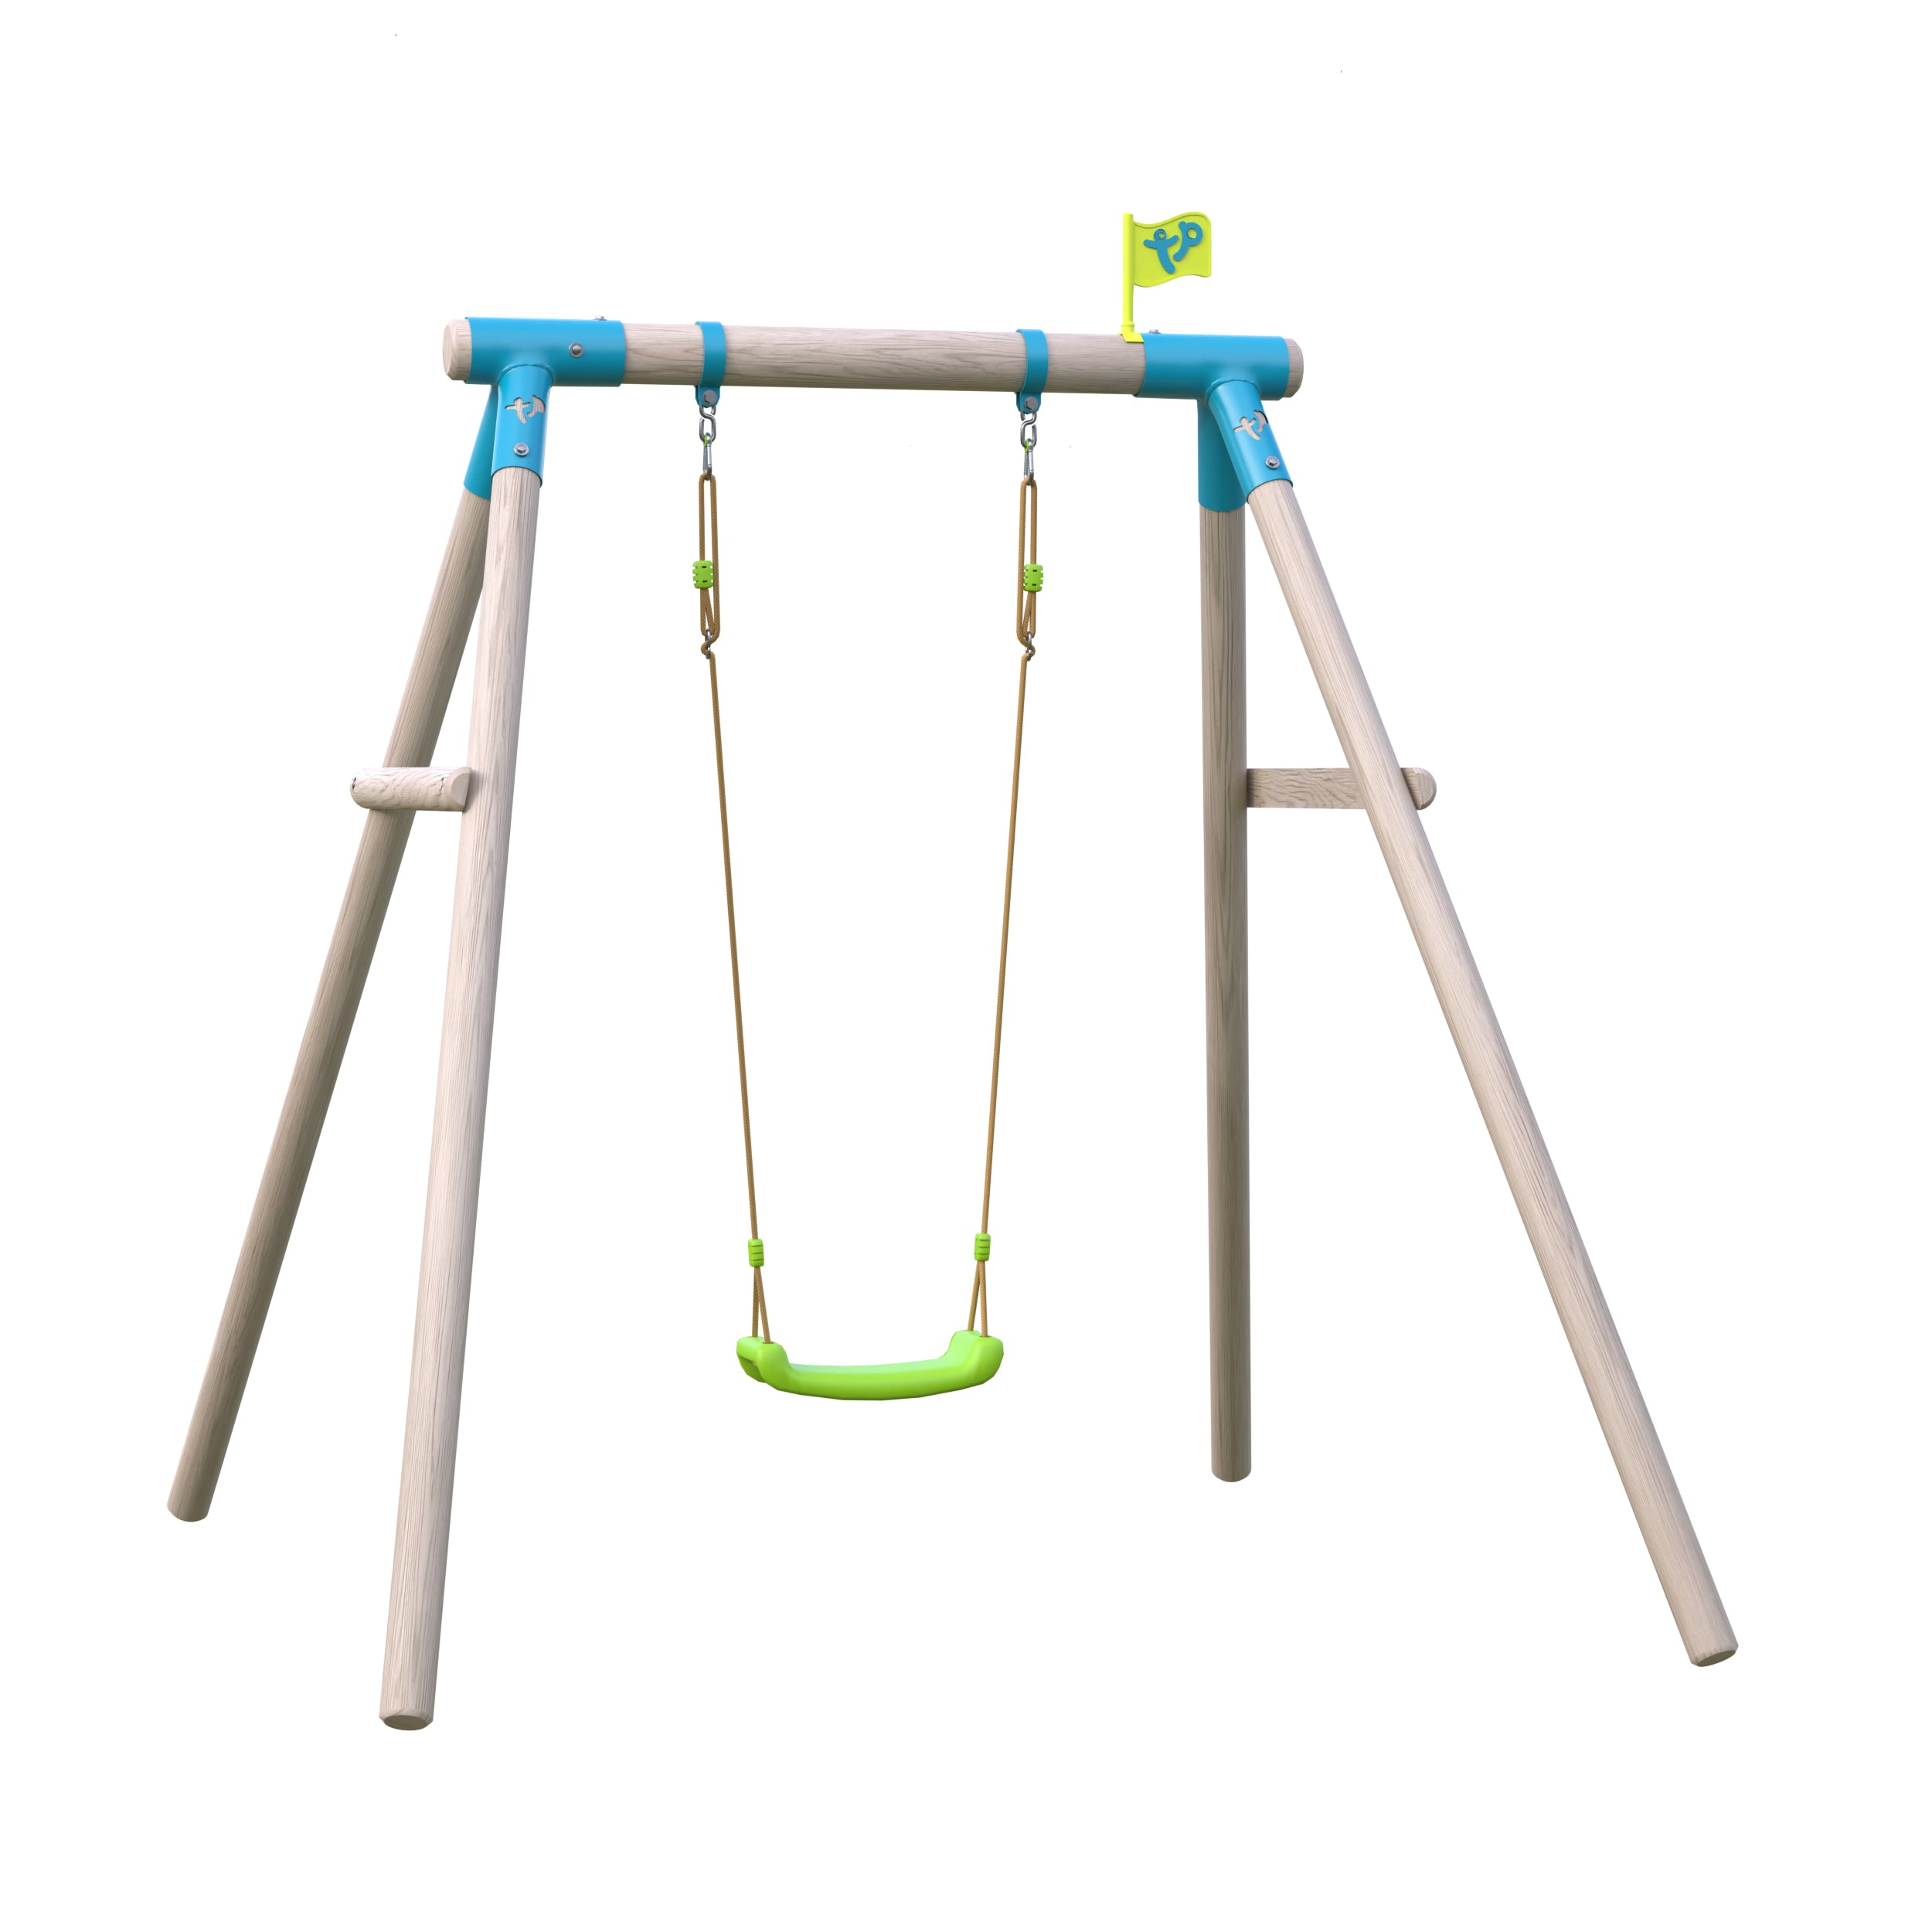 TP Single Compact Roundwood Swing Set - FSC<sup>®</sup> certified